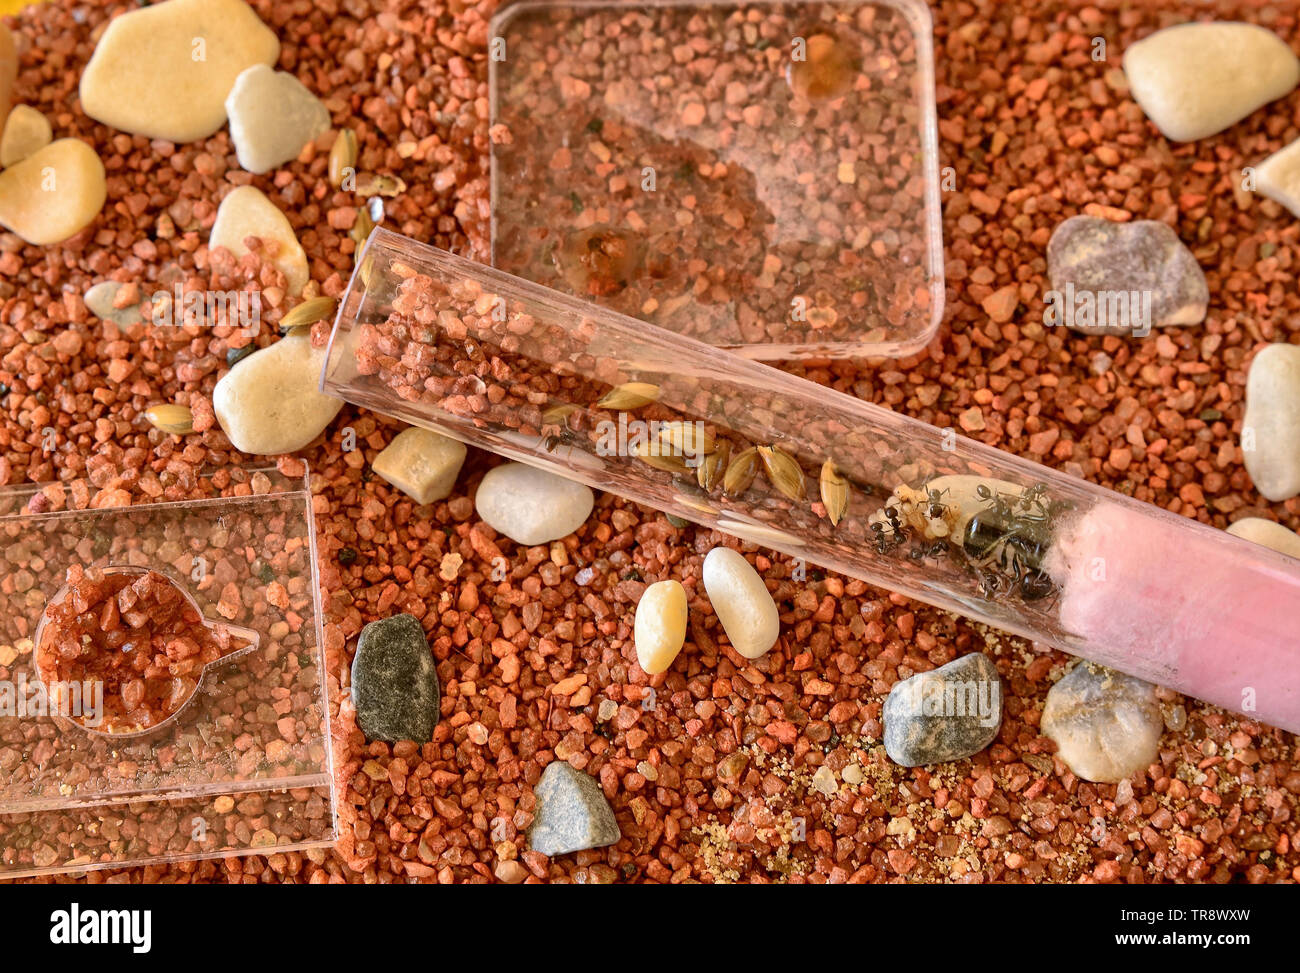 Anthill in captivity: in the newly introduced test tube the queen is surrounded by workers and her eggs. The workers move around the queen. Stock Photo